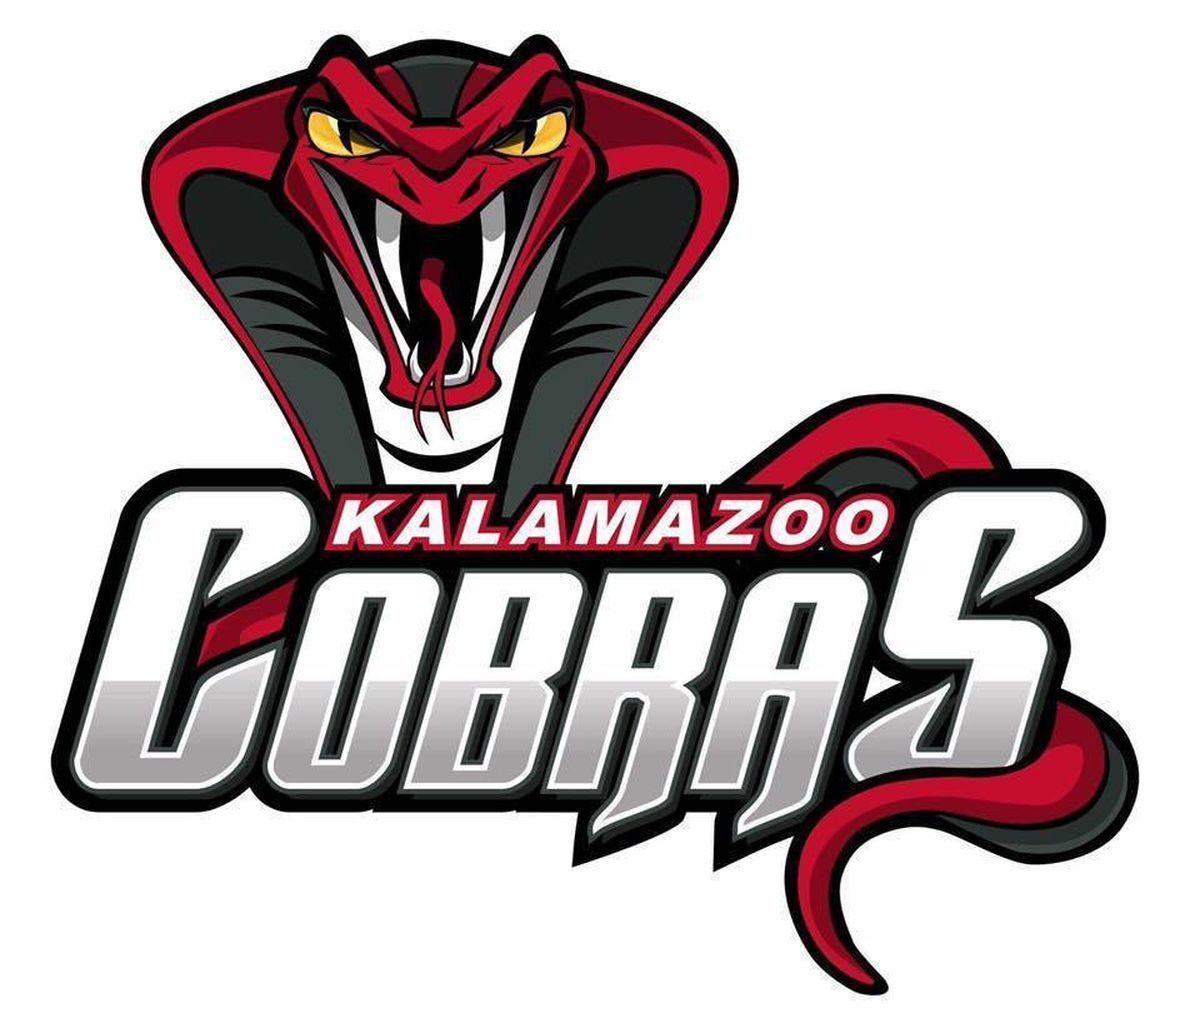 Kalamazoo Logo - Kalamazoo Cobras, Try Out Dates, Logo, First Game Date Released